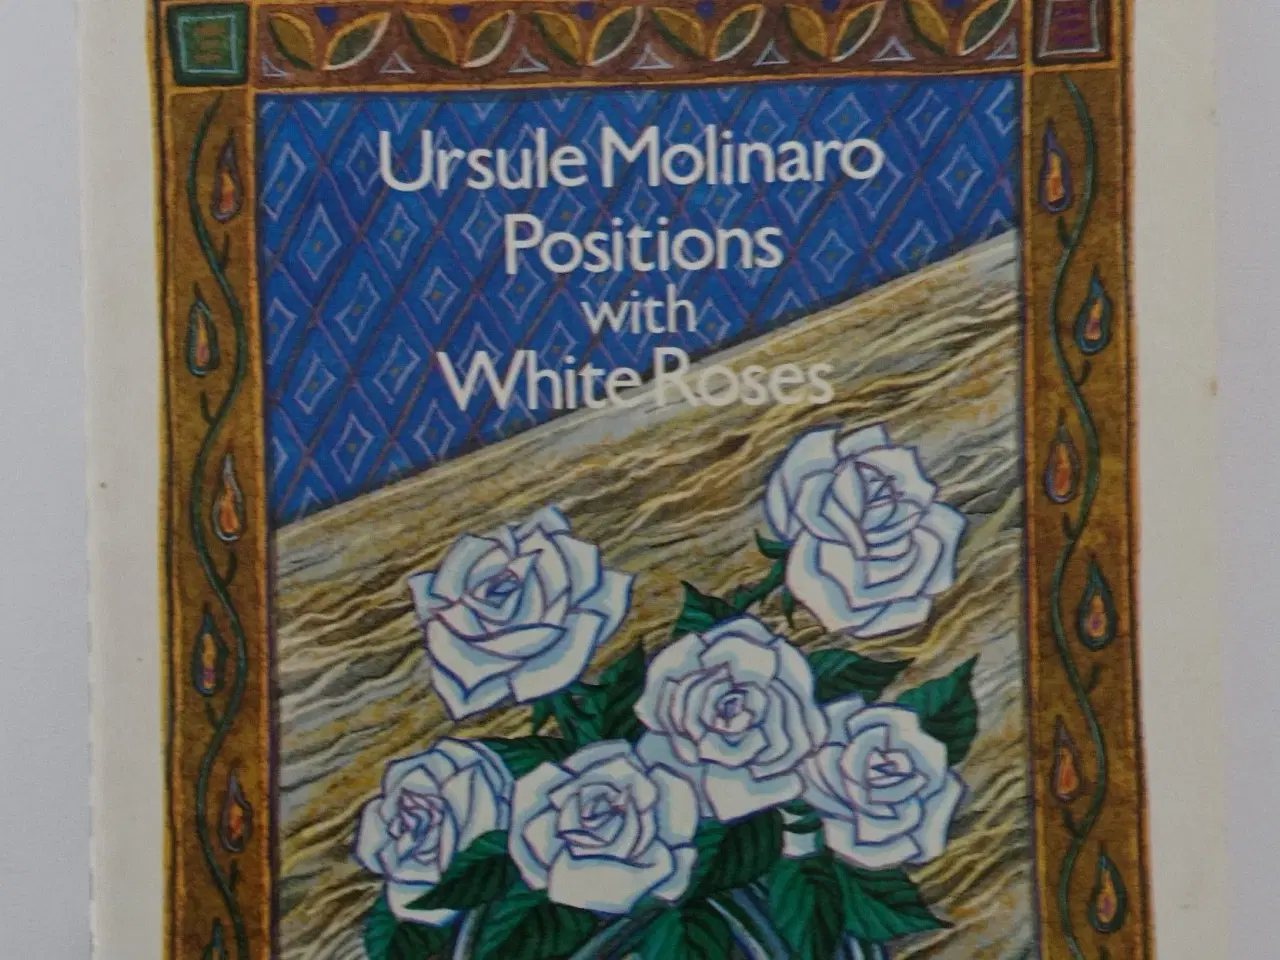 Billede 1 - Positions with White Roses. Ursule Molinaro